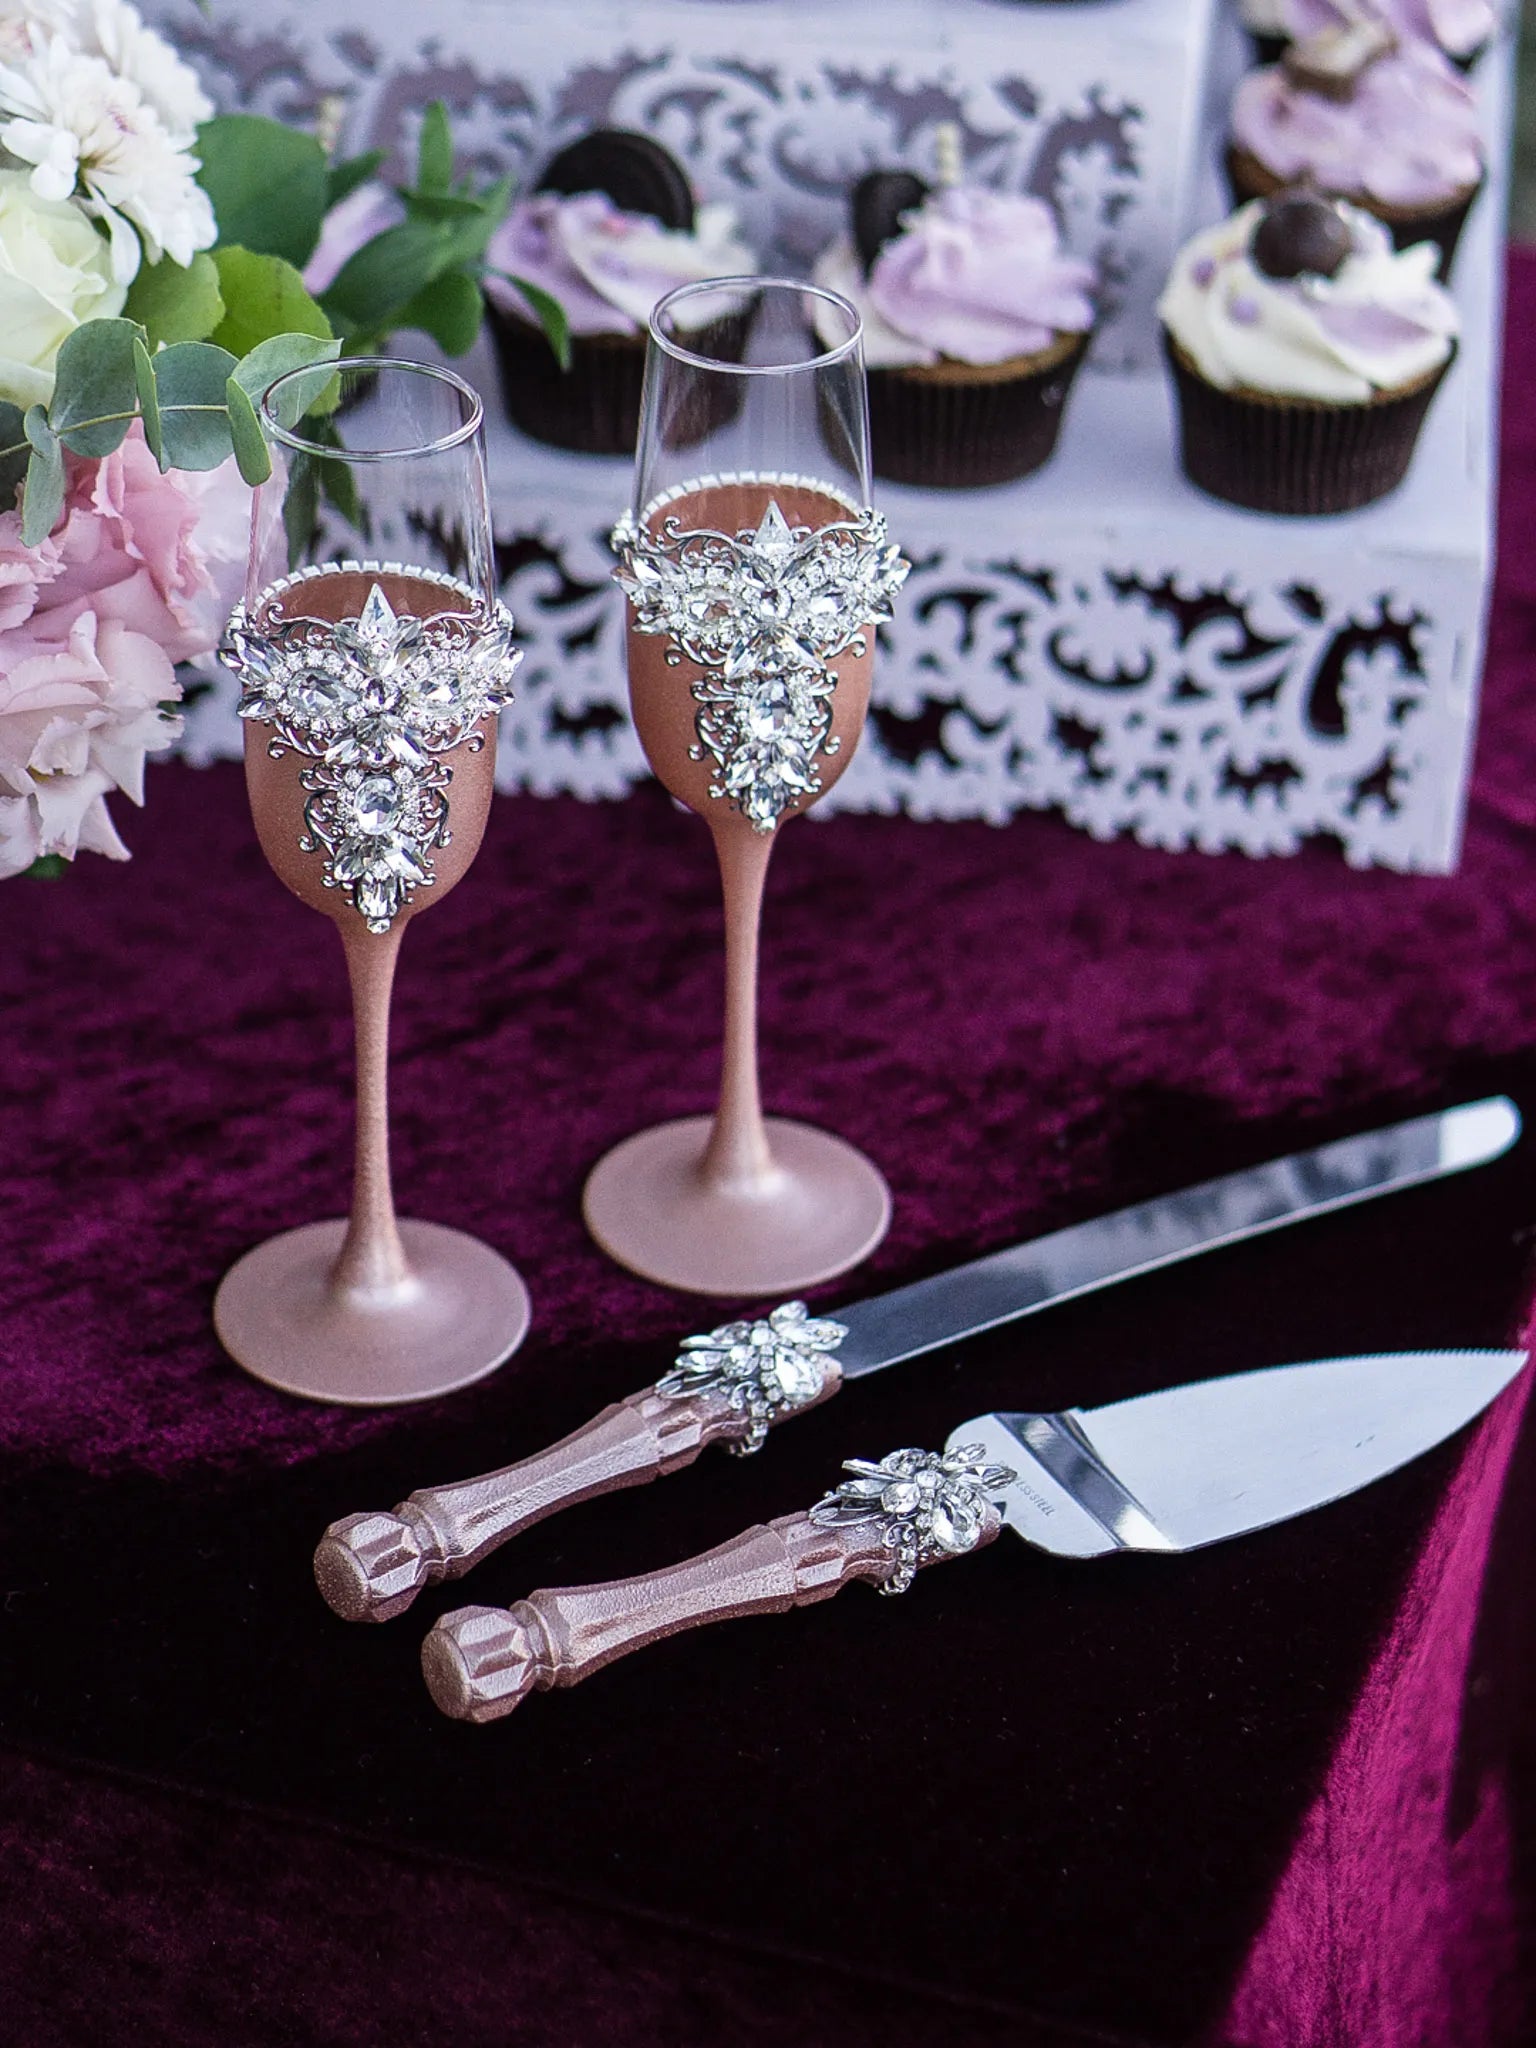 Elegant Rose Gold Champagne Flutes and Cake Knife with Crystals